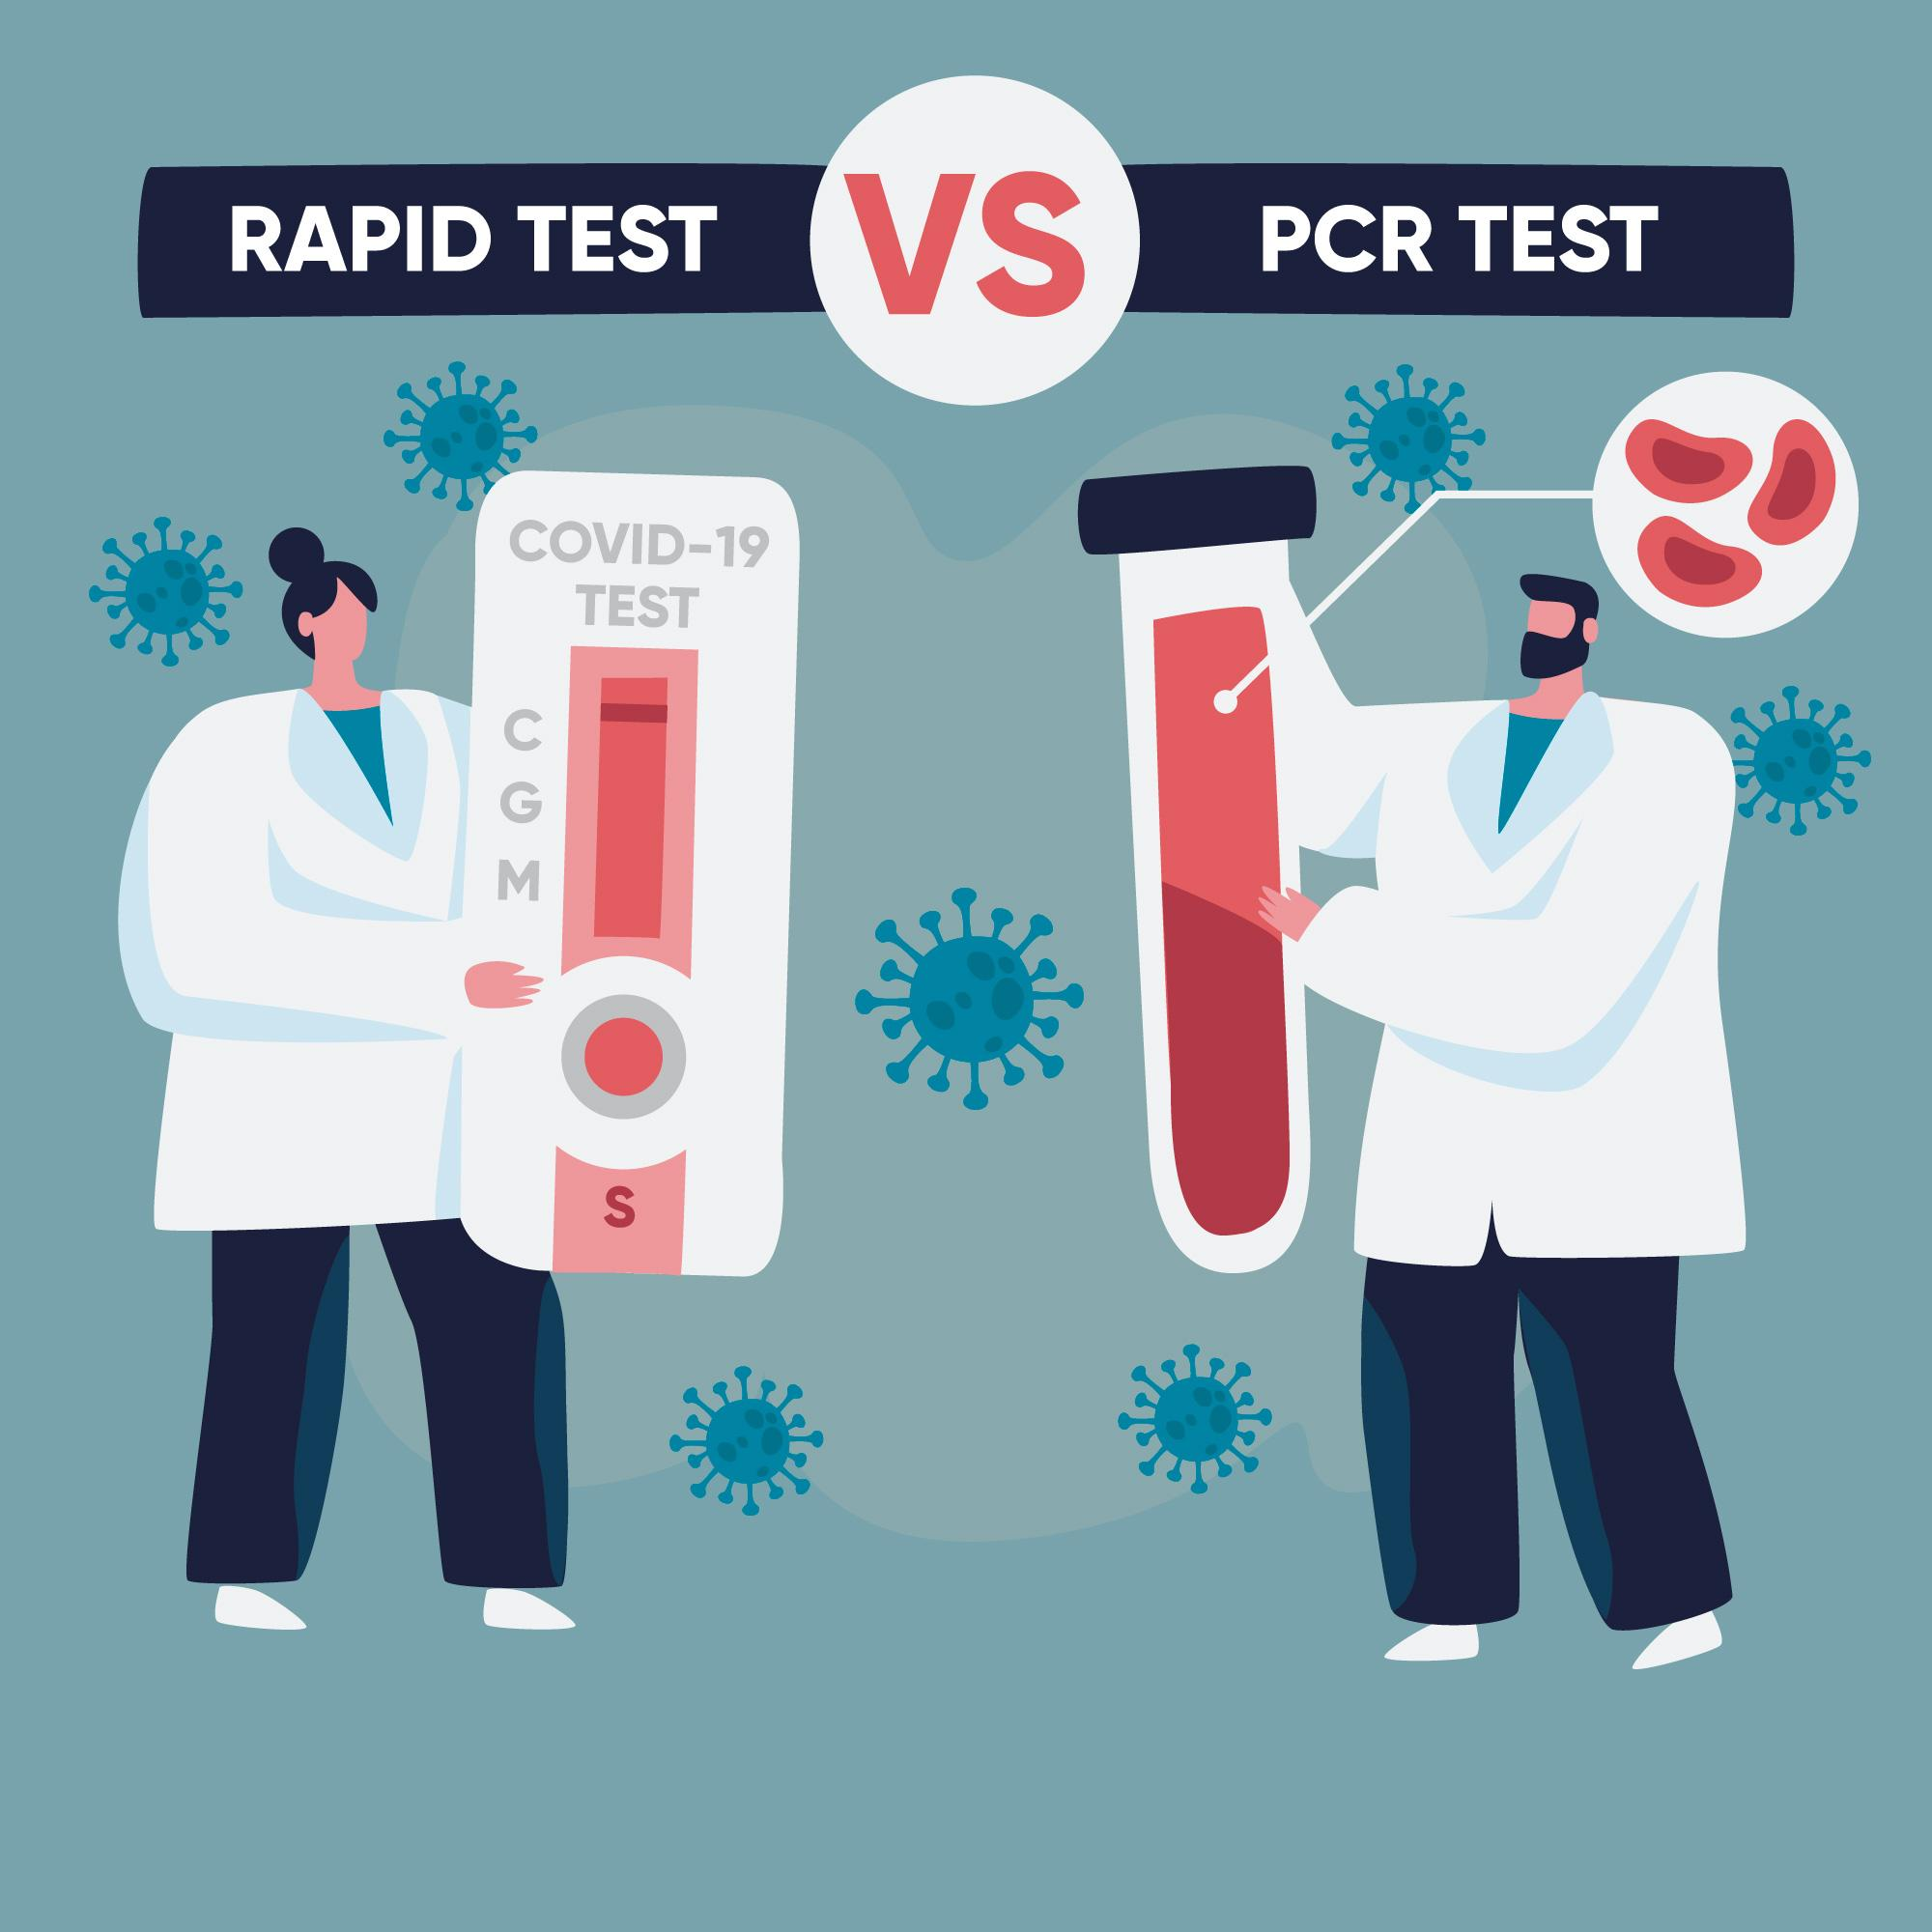 Both PCR and rapid tests have their pros and cons.